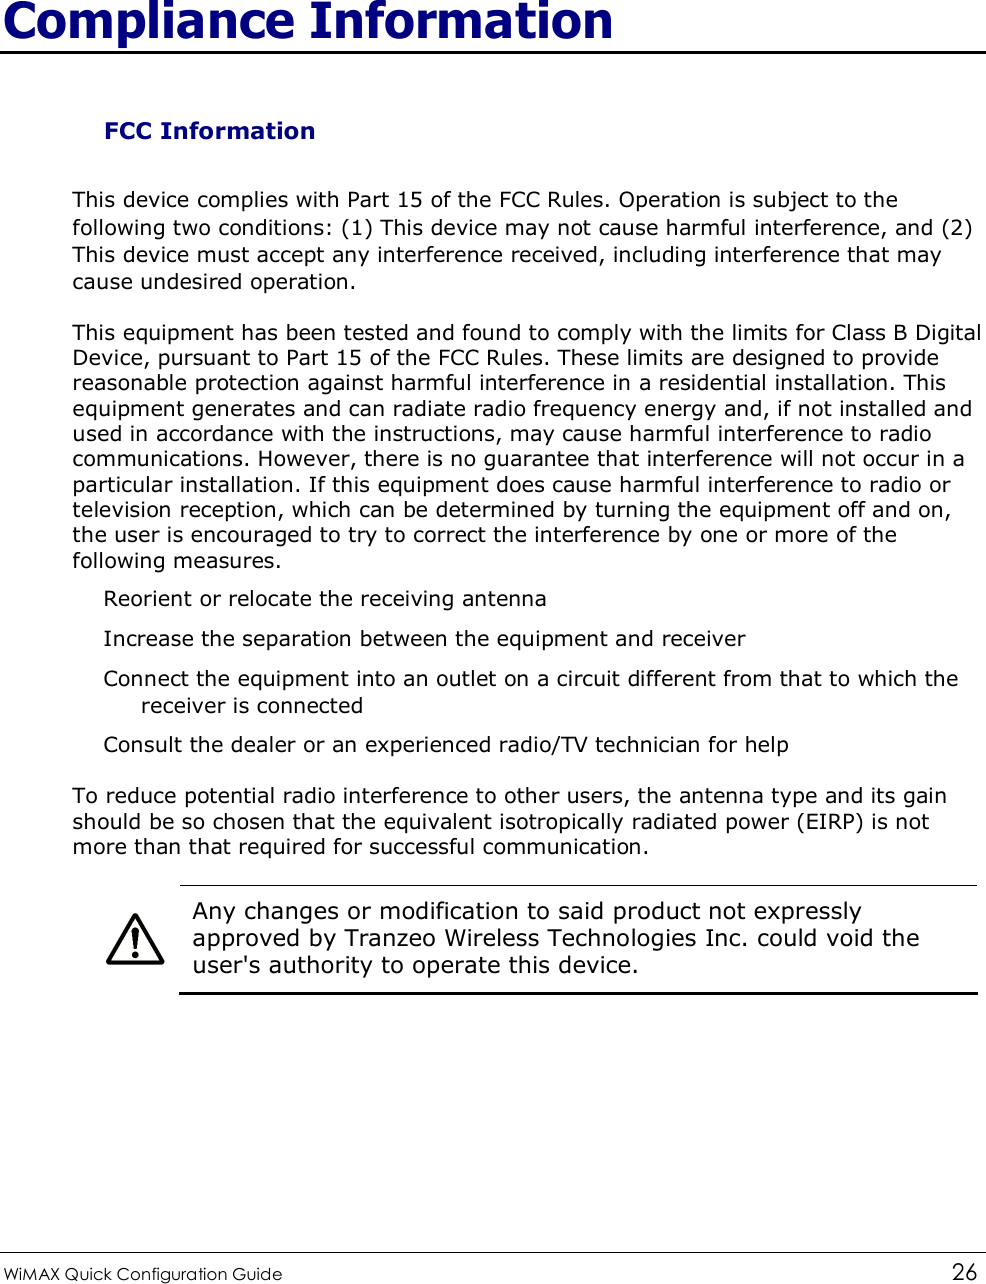  WiMAX Quick Configuration Guide   26    Compliance Information FCC Information This device complies with Part 15 of the FCC Rules. Operation is subject to the following two conditions: (1) This device may not cause harmful interference, and (2) This device must accept any interference received, including interference that may cause undesired operation. This equipment has been tested and found to comply with the limits for Class B Digital Device, pursuant to Part 15 of the FCC Rules. These limits are designed to provide reasonable protection against harmful interference in a residential installation. This equipment generates and can radiate radio frequency energy and, if not installed and used in accordance with the instructions, may cause harmful interference to radio communications. However, there is no guarantee that interference will not occur in a particular installation. If this equipment does cause harmful interference to radio or television reception, which can be determined by turning the equipment off and on, the user is encouraged to try to correct the interference by one or more of the following measures. Reorient or relocate the receiving antenna Increase the separation between the equipment and receiver Connect the equipment into an outlet on a circuit different from that to which the receiver is connected Consult the dealer or an experienced radio/TV technician for help To reduce potential radio interference to other users, the antenna type and its gain should be so chosen that the equivalent isotropically radiated power (EIRP) is not more than that required for successful communication.   Any changes or modification to said product not expressly approved by Tranzeo Wireless Technologies Inc. could void the user&apos;s authority to operate this device.    